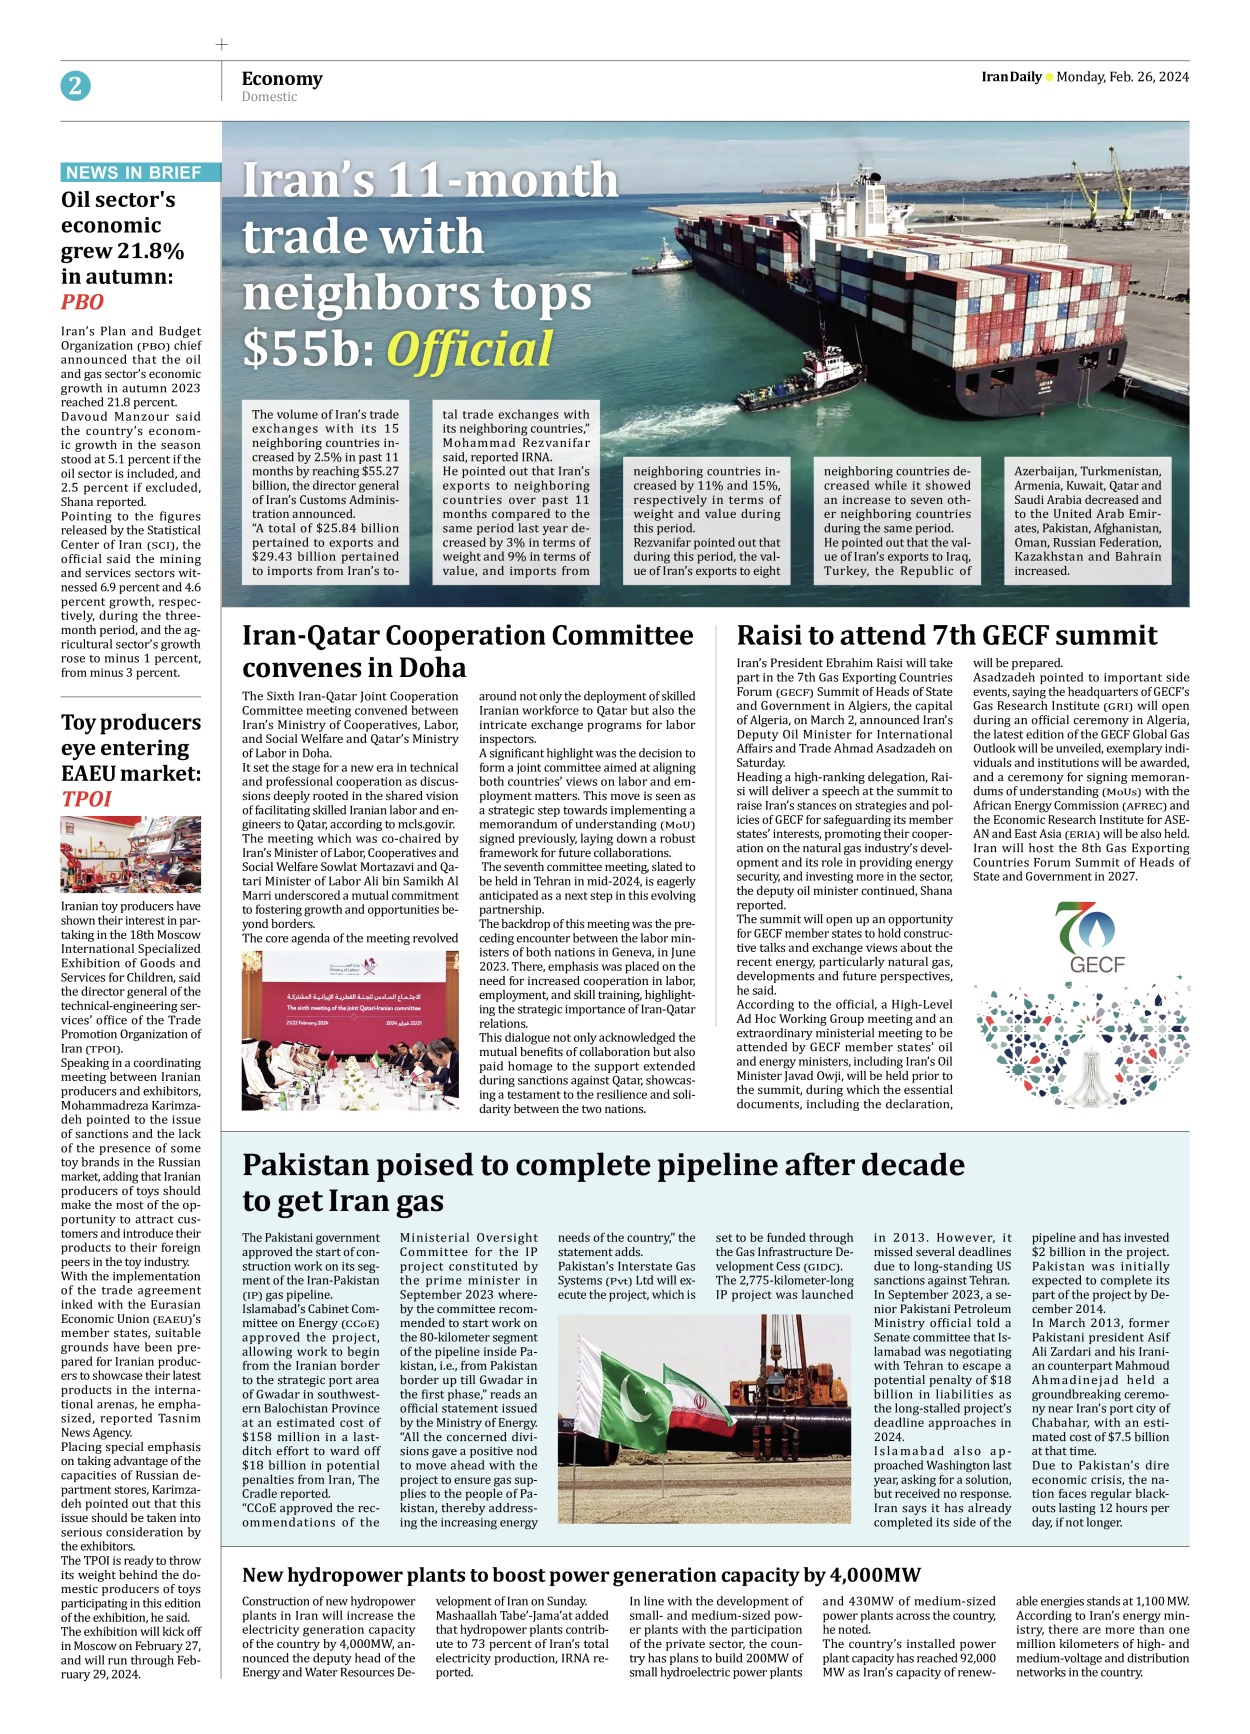 Iran Daily - Number Seven Thousand Five Hundred and Fifteen - 26 February 2024 - Page 2